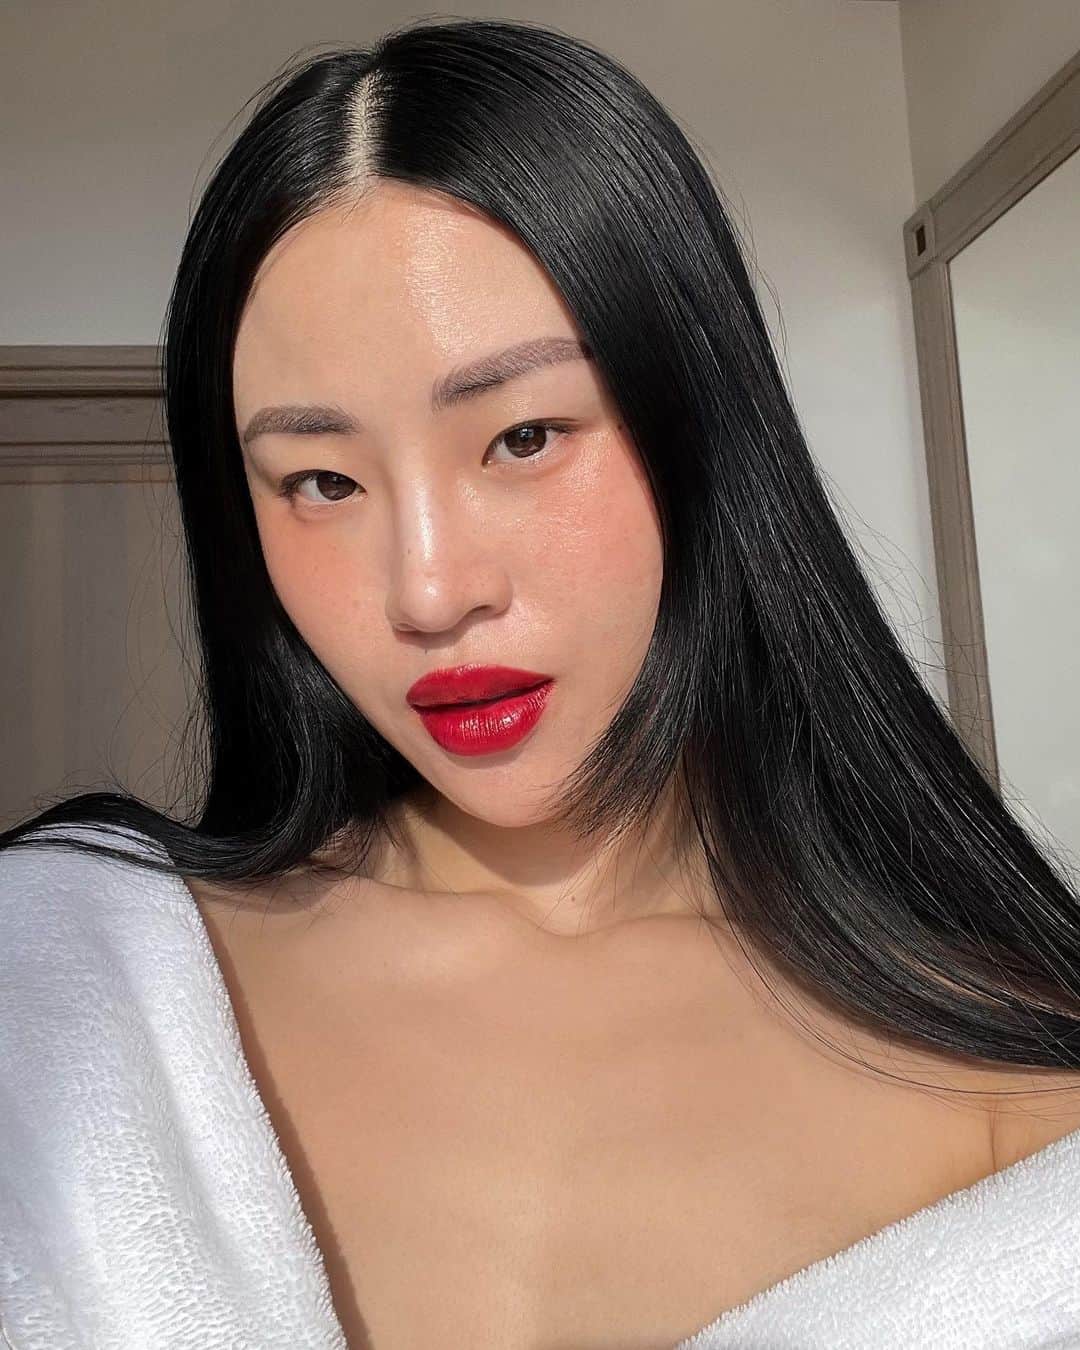 NATALIE LIAOのインスタグラム：「Some favorite visual moments from my week with @welovecoco @chanel.beauty celebrating the art of color and the power of makeup in St. Tropez.  I am a blush and lipstick girl, always. I am obsessed with Chanel’s cheek balm product for its dewy application. I am wearing the color 3 Vital Beige in this look. Lipstick is Rouge Allure Velvet in Sophistiquée 55.  Red was the first lipstick color Gabrielle Chanel created. Because she believed and represented the power, courage and vitality of women all around. An idea I absolutely resonate with and makes me feel proud to wear Chanel beauty ❤️  Thank you to the entire CHANEL Beauty team for this unforgettable experience 💋  #coloranima #chanelbeauty #cometescollective」